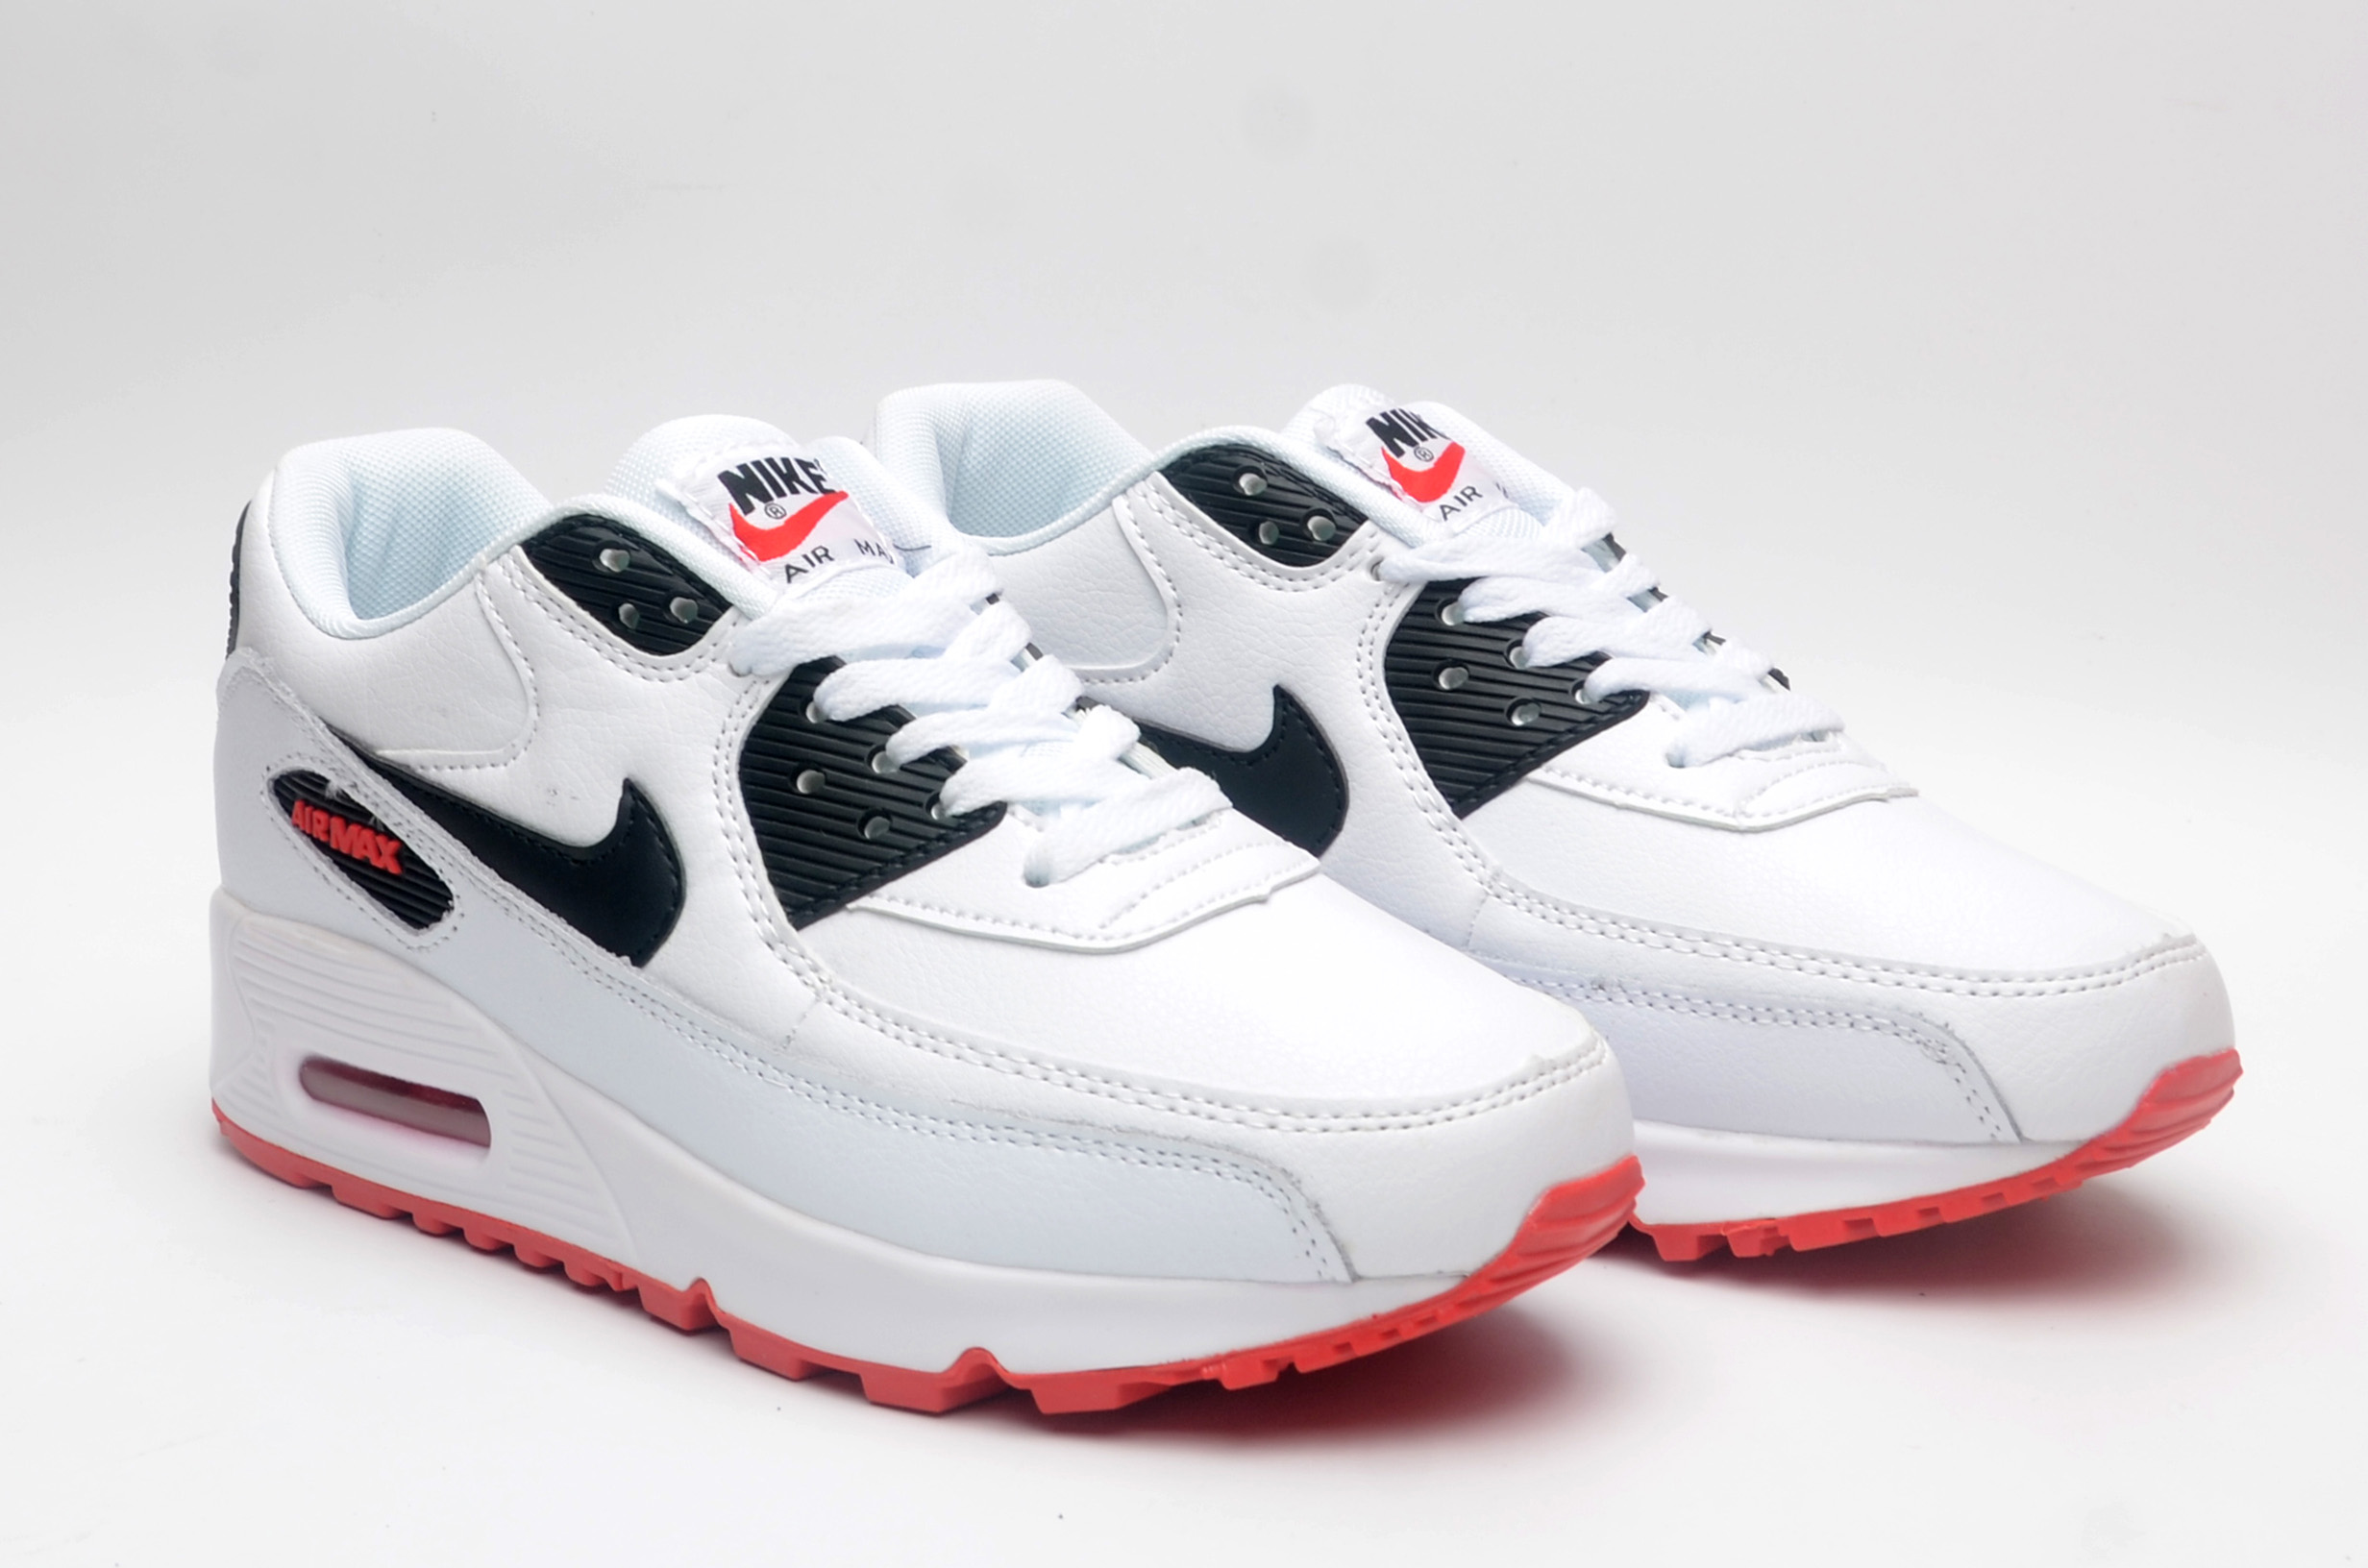 Women's Running weapon Air Max 90 Shoes 022